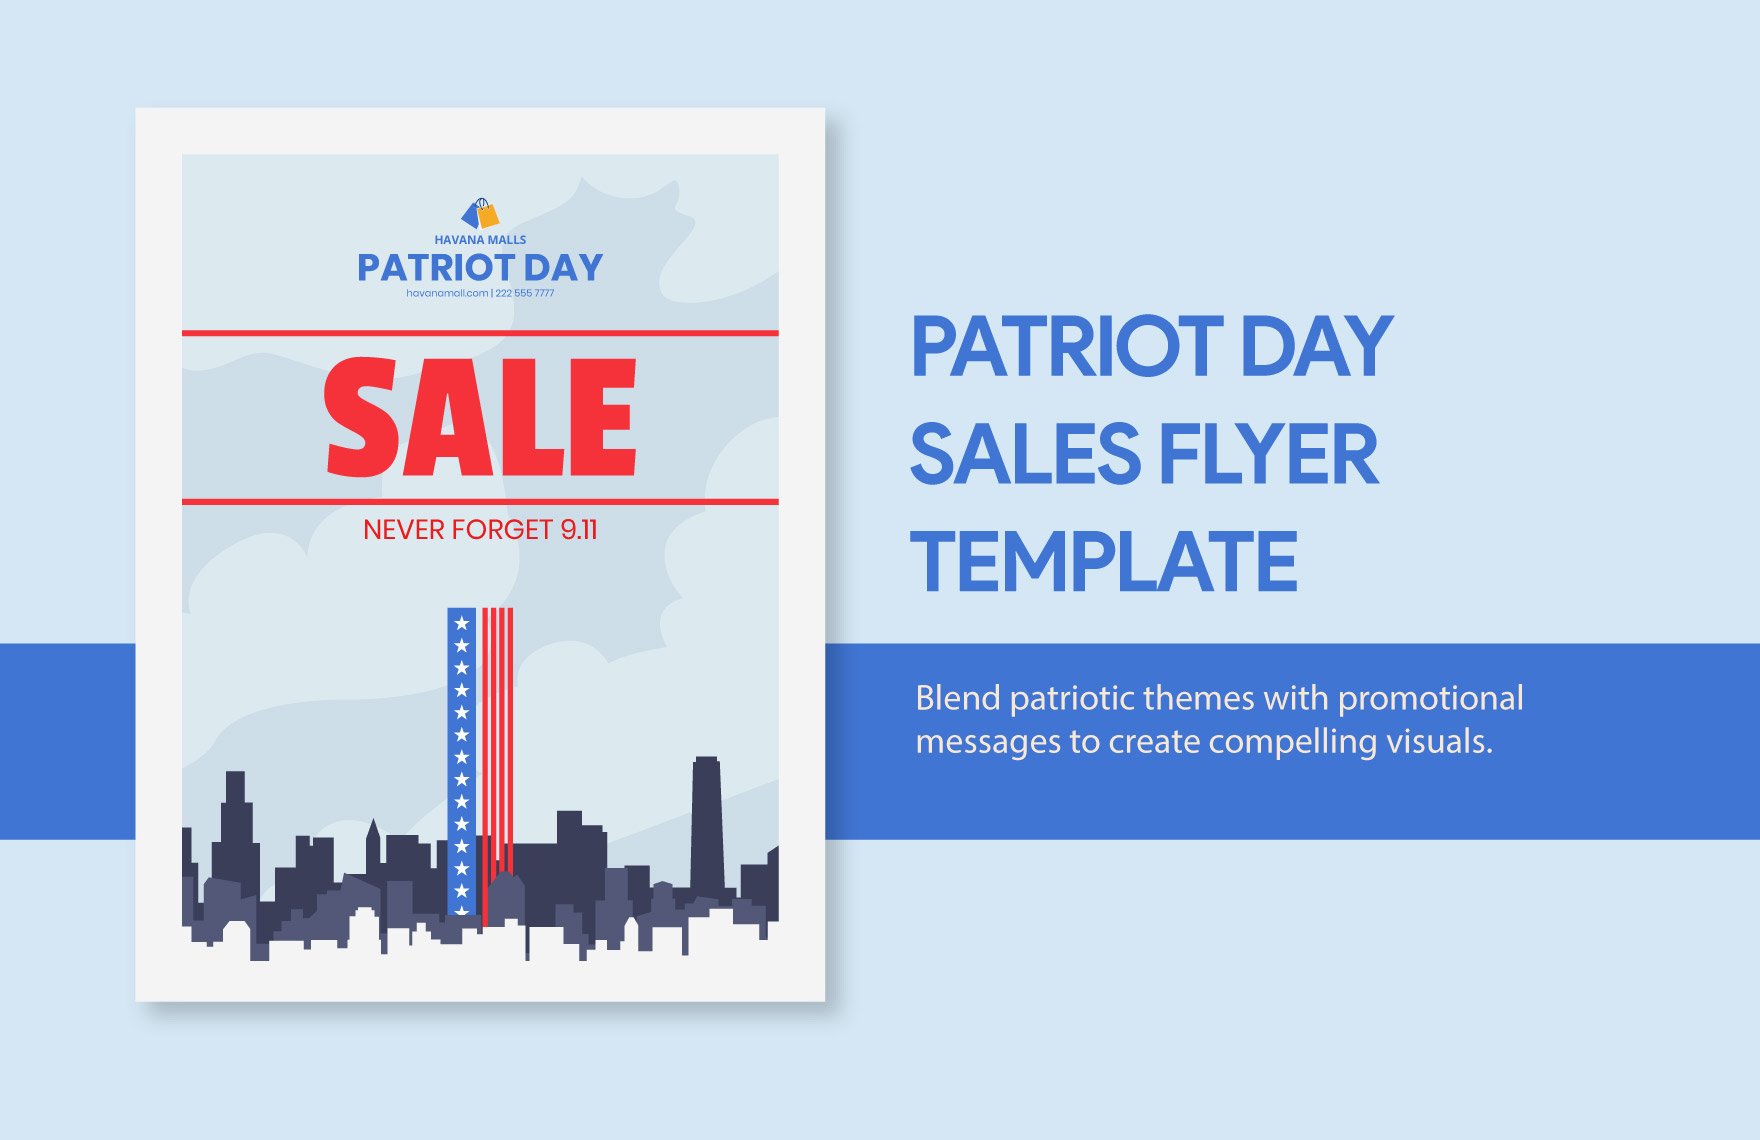 Free Patriot Day Sales Flyer Template in Illustrator, PSD, PNG